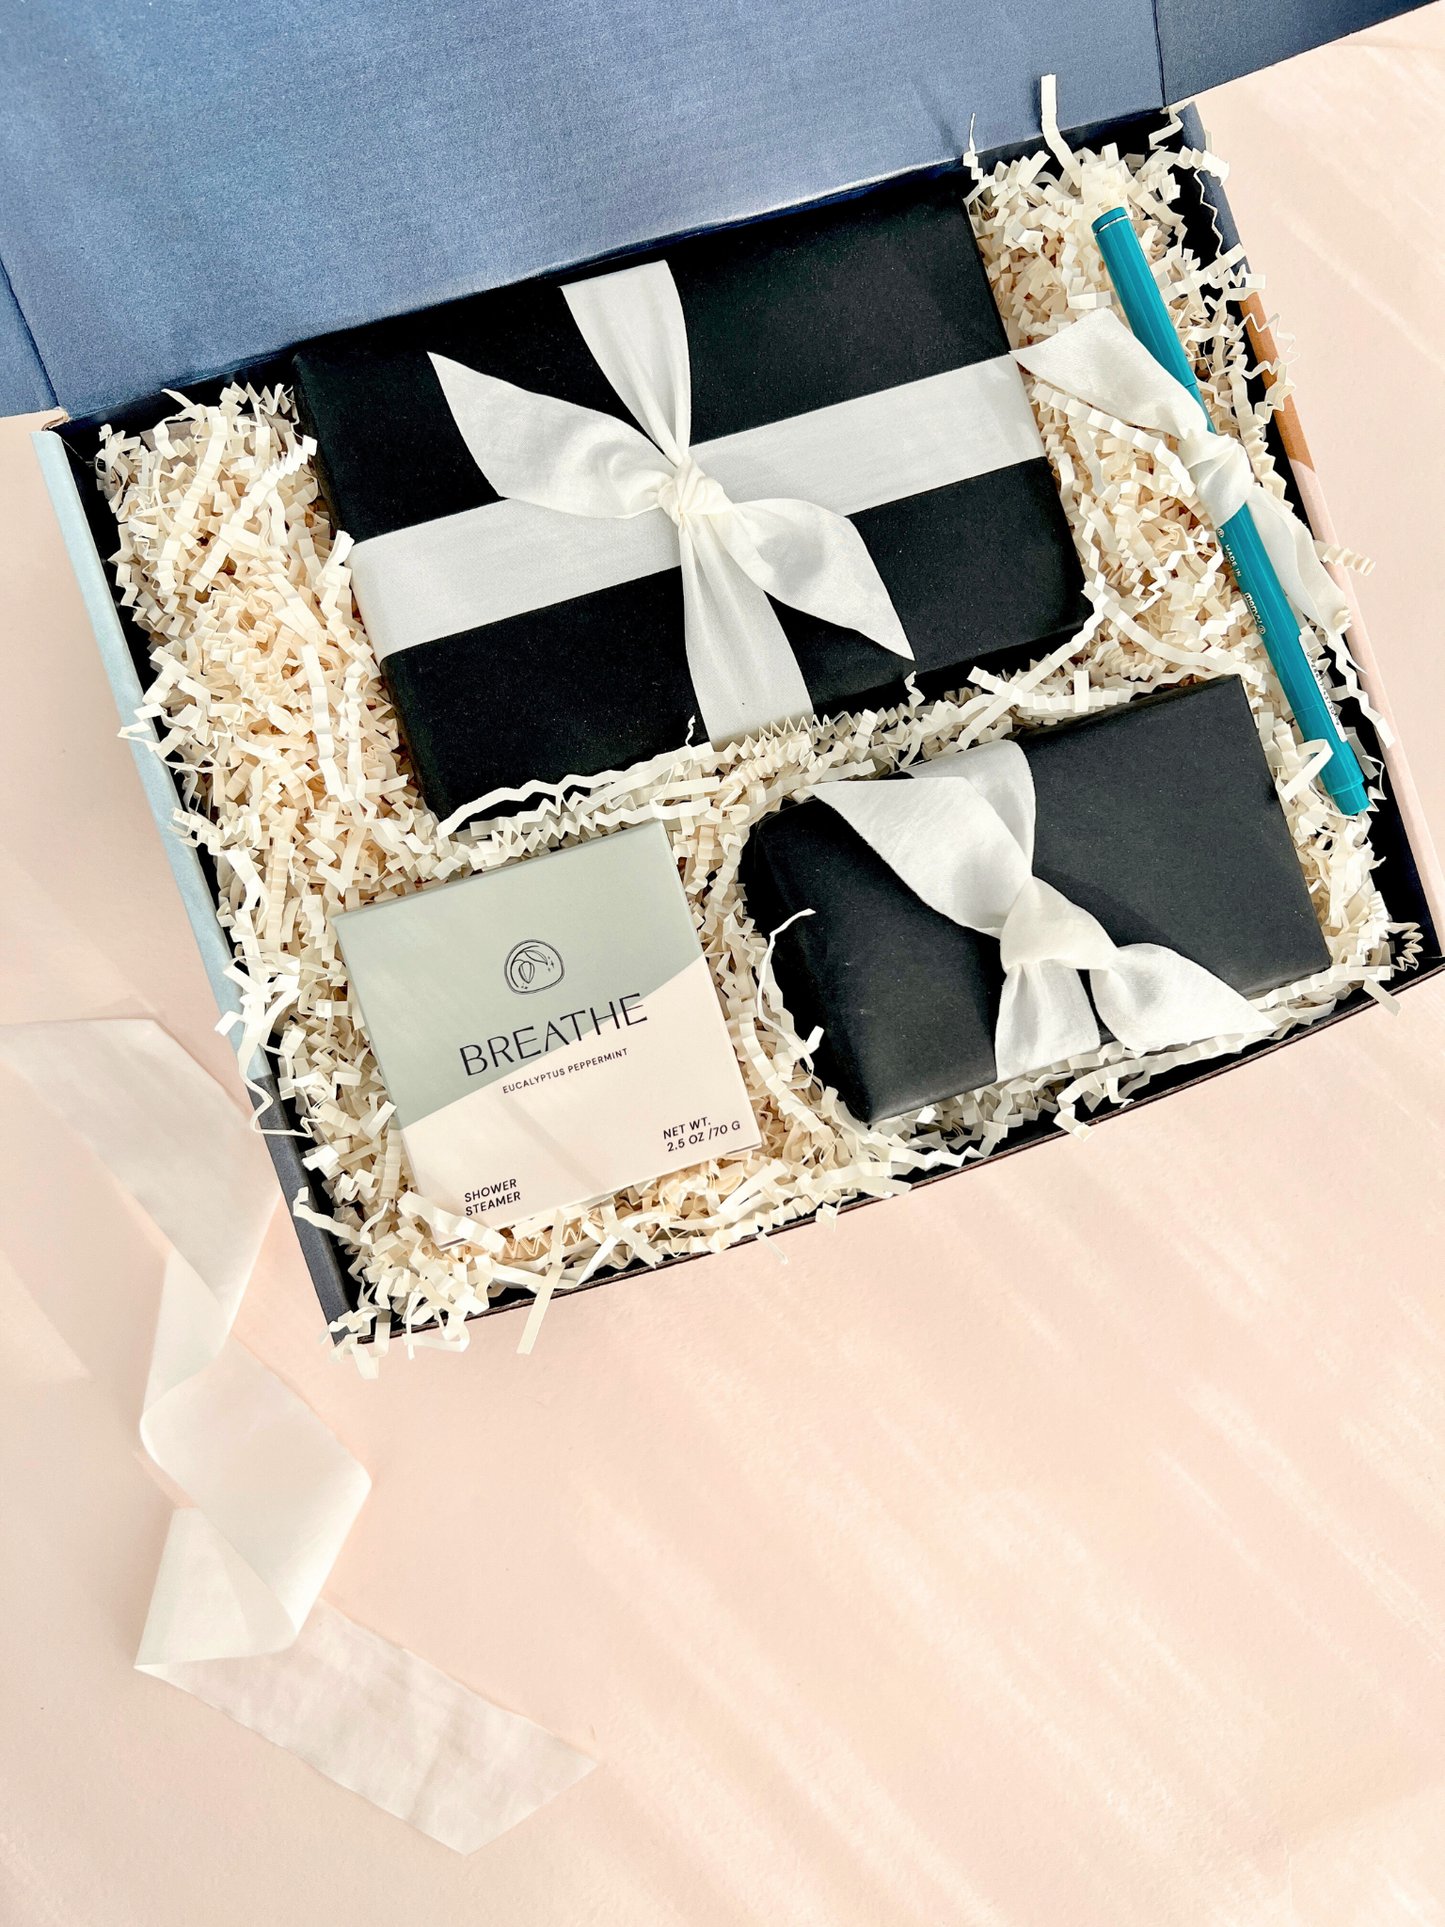 The Daily Motivation Gift Box